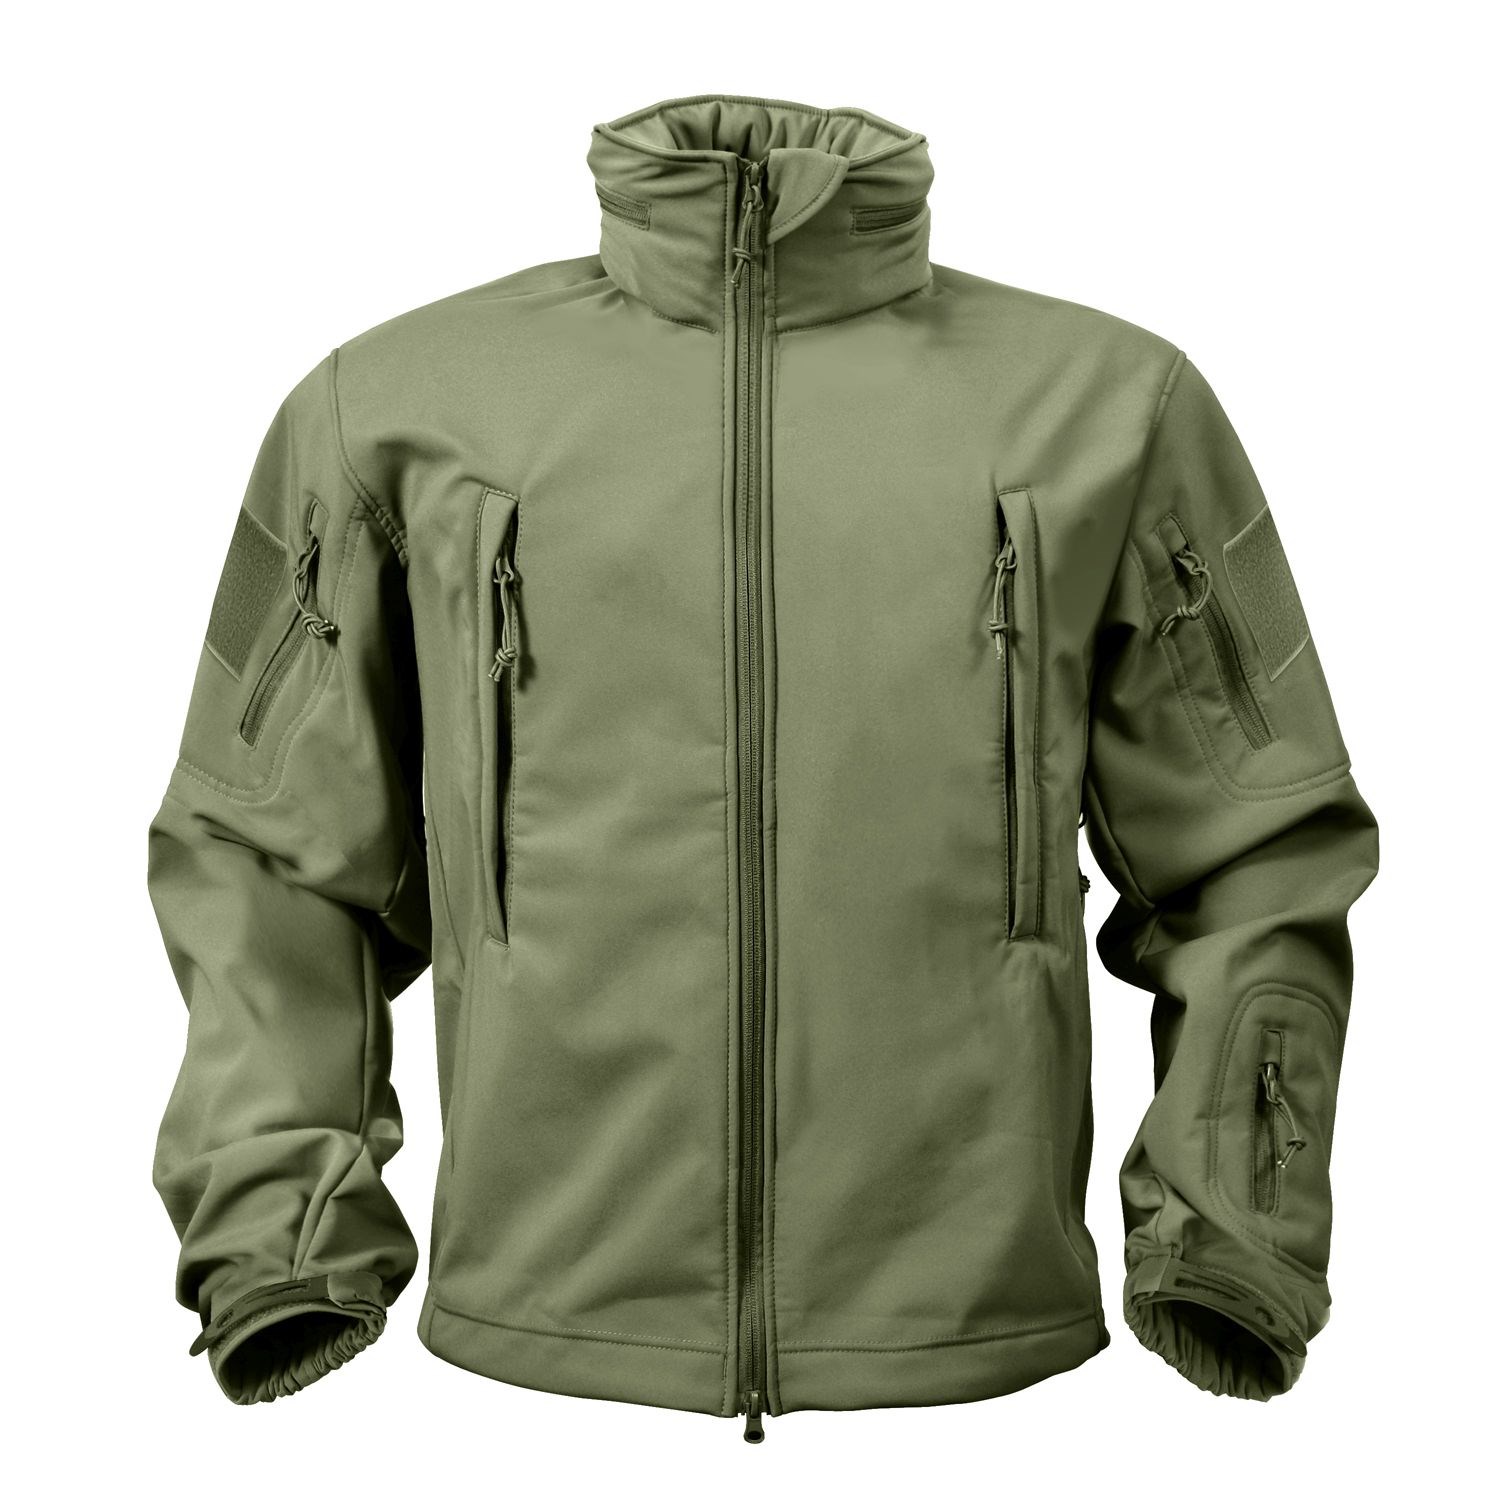 TACTICAL hooded jacket softshell OLIVE ROTHCO 9745 L-11